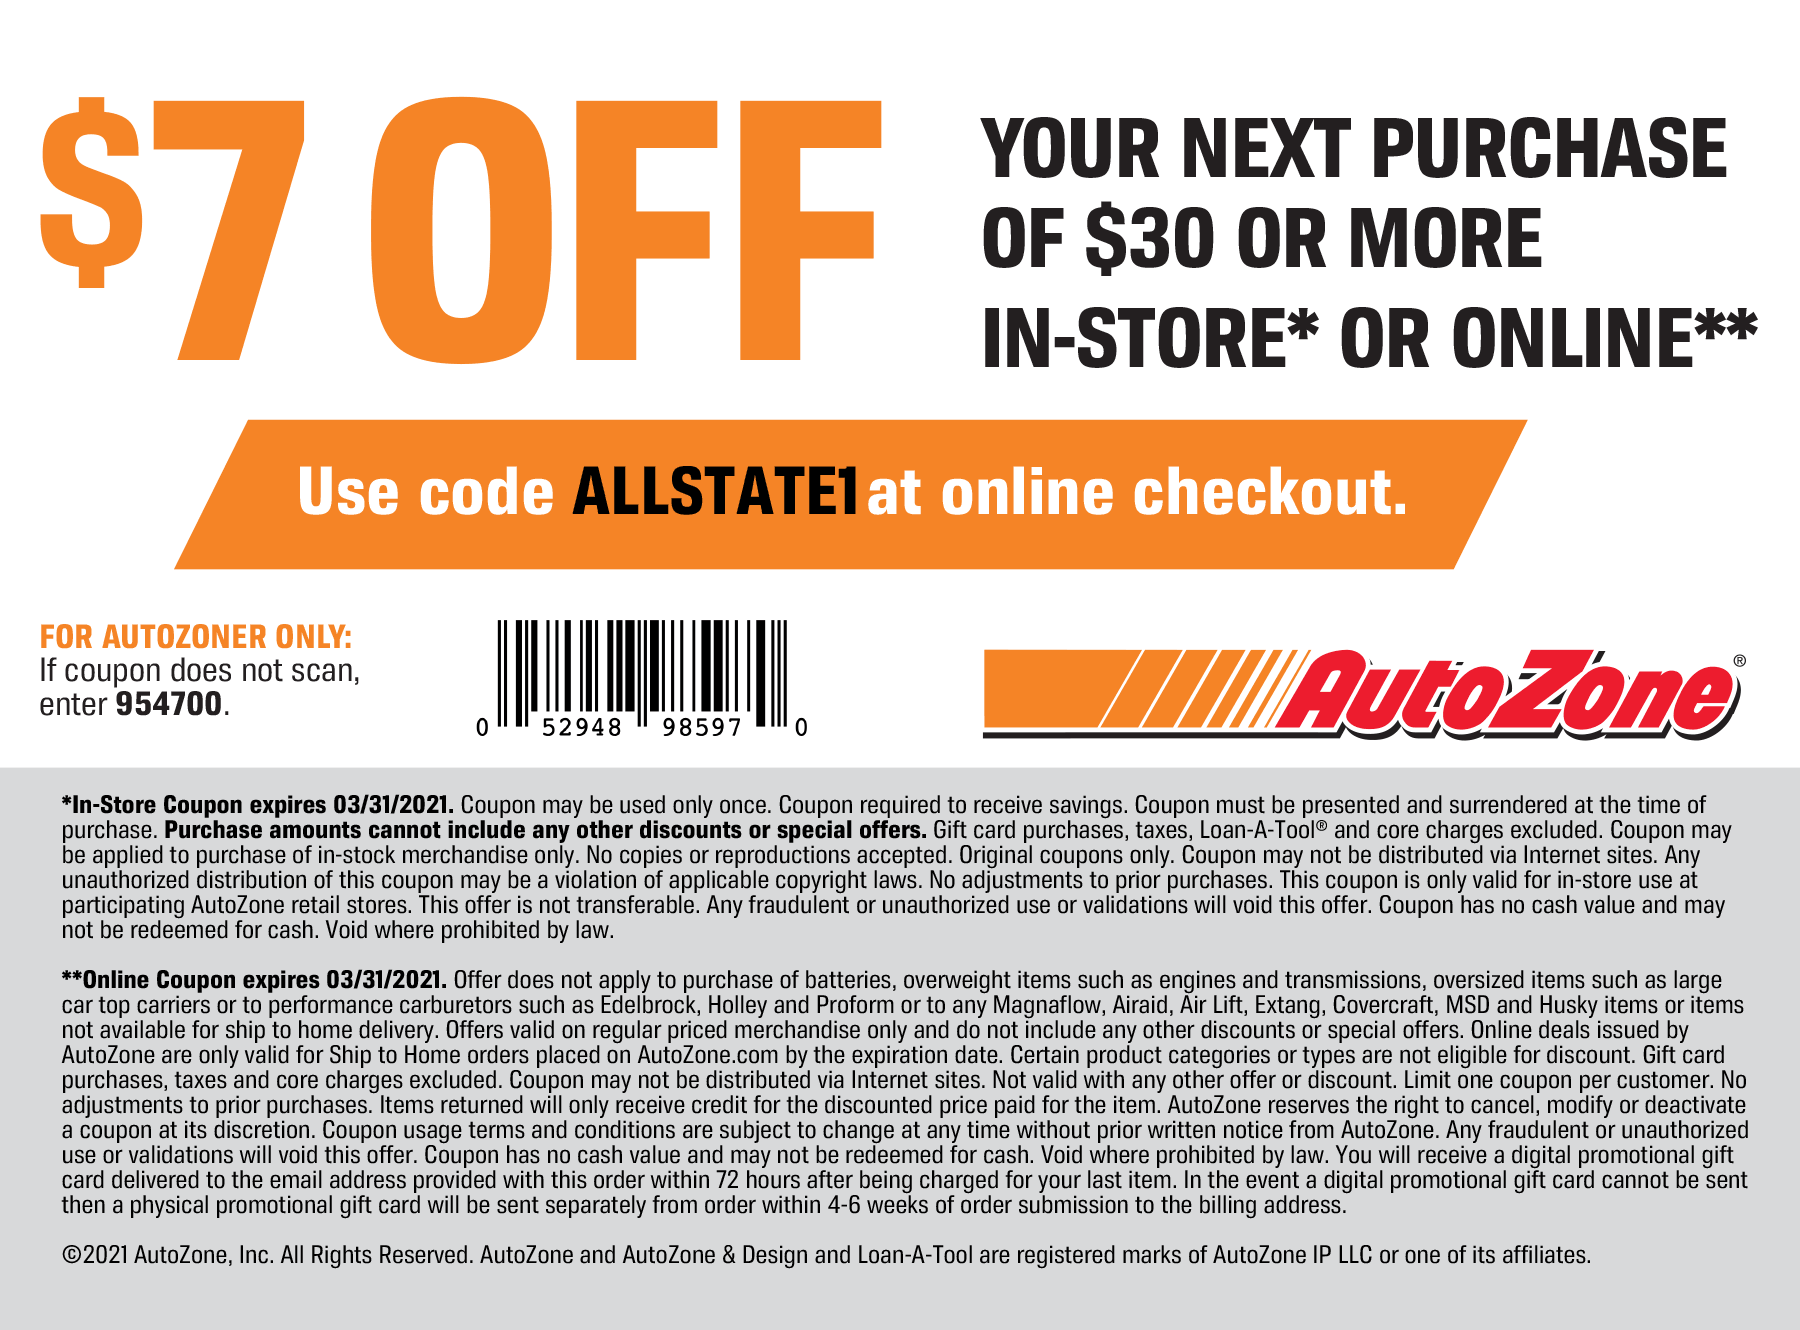 september-2021-7-off-30-at-autozone-car-parts-or-online-via-promo